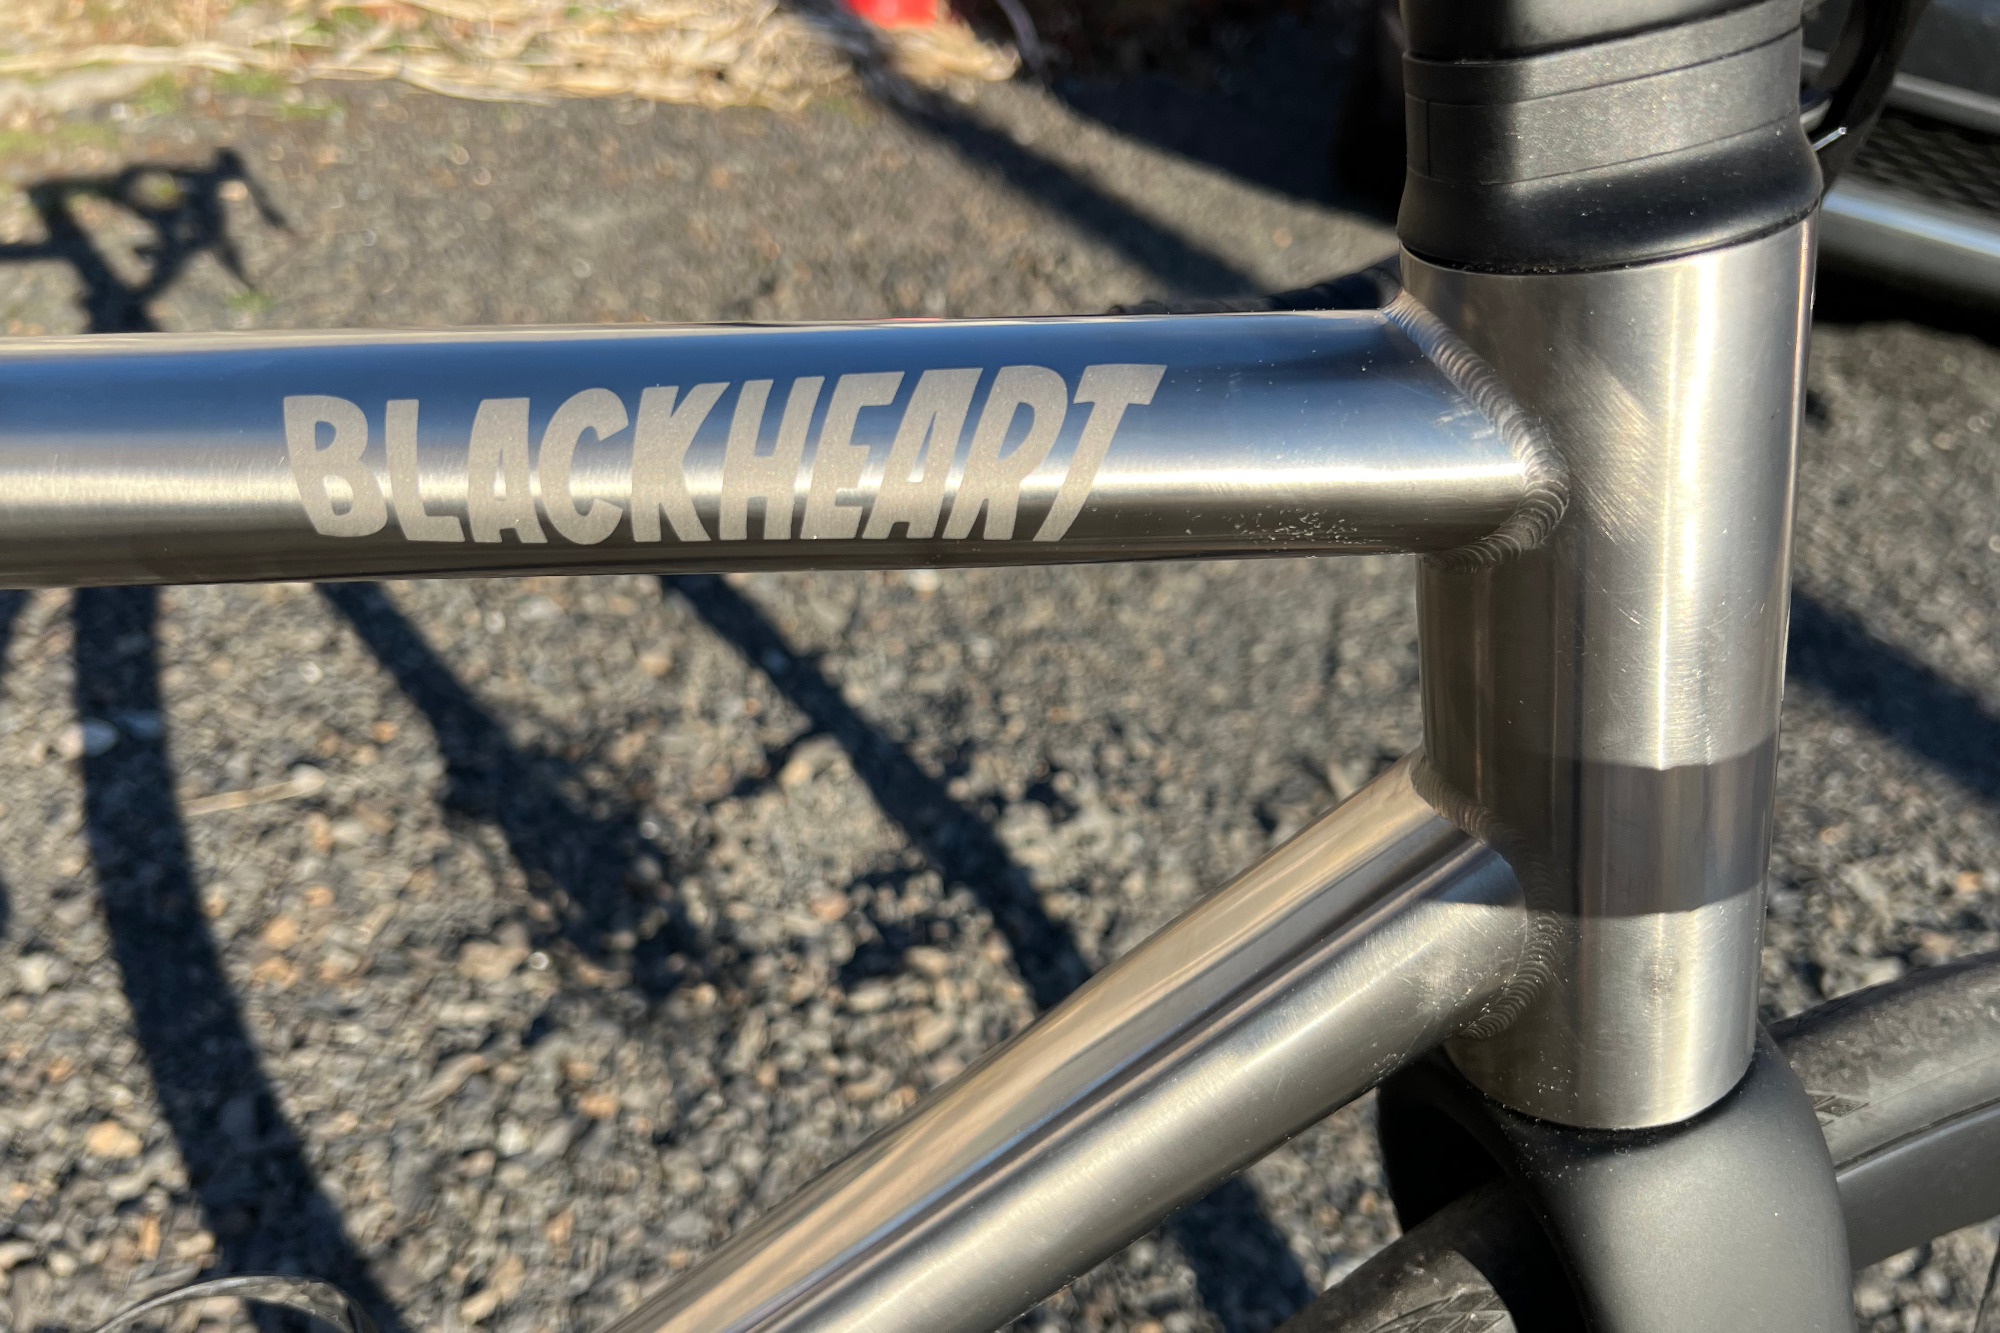 Blackheart Bike Co's Road Ti reviewed: The Blackheart logo, which appears only once on each side of the toptube, is rather subtle.